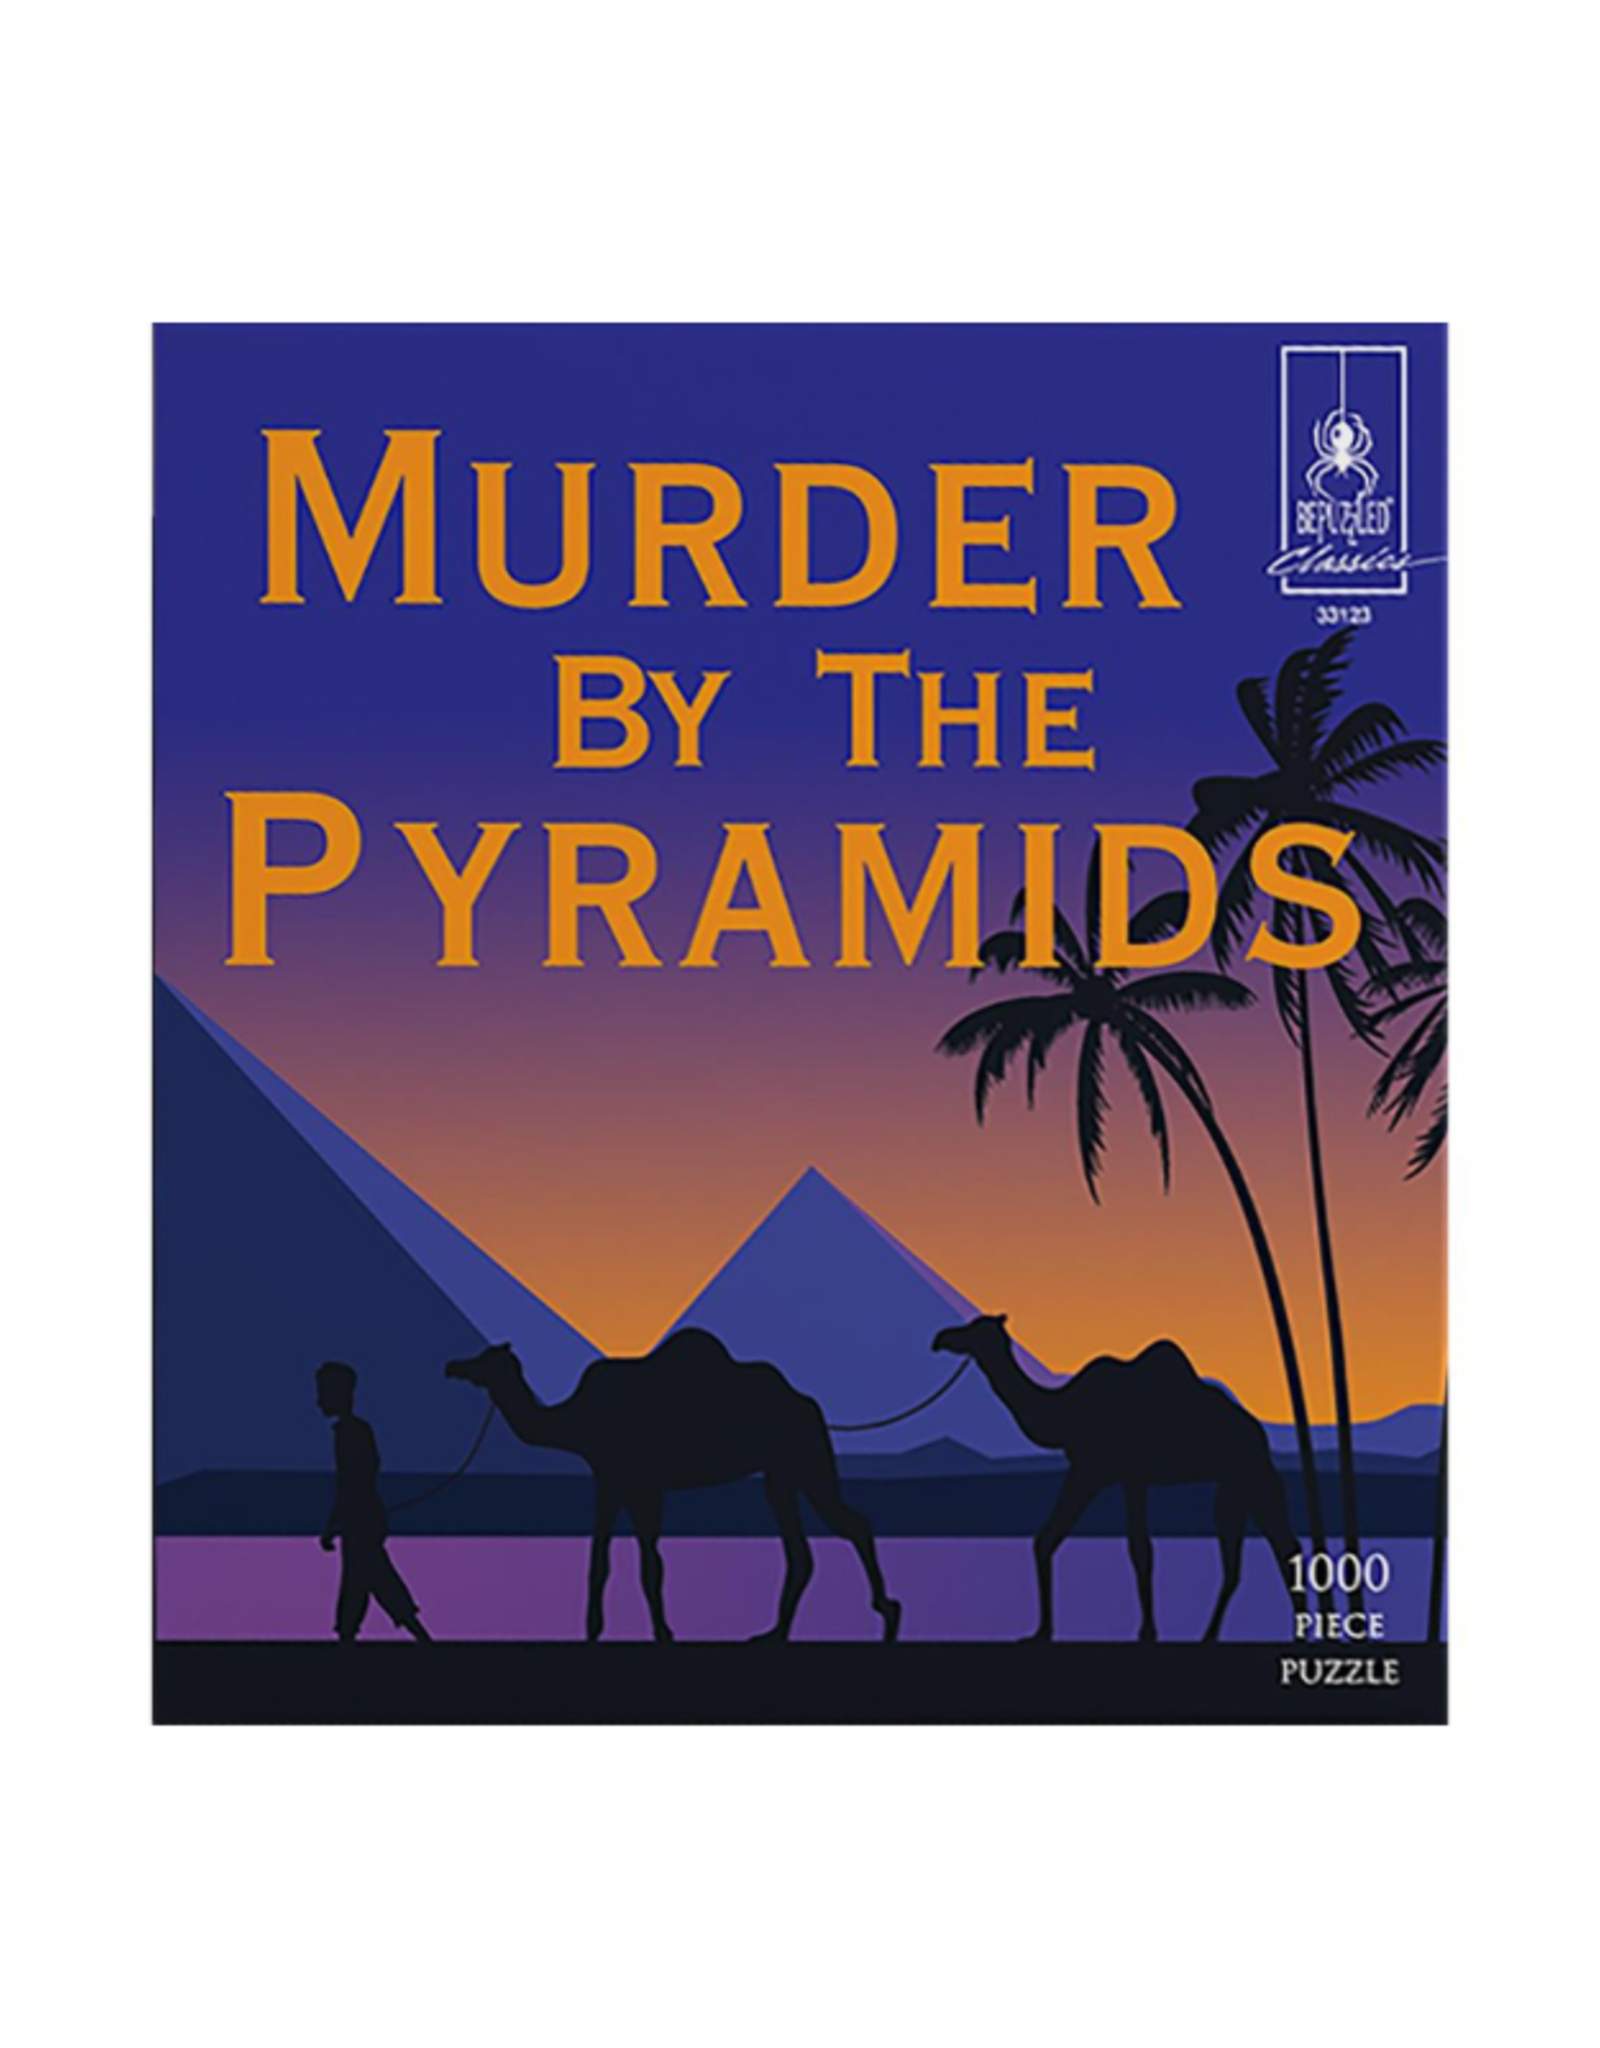 Murder on the Nile - Murder by the Pyramids -  Classic Mystery Jigsaw Puzzle (1000pc)